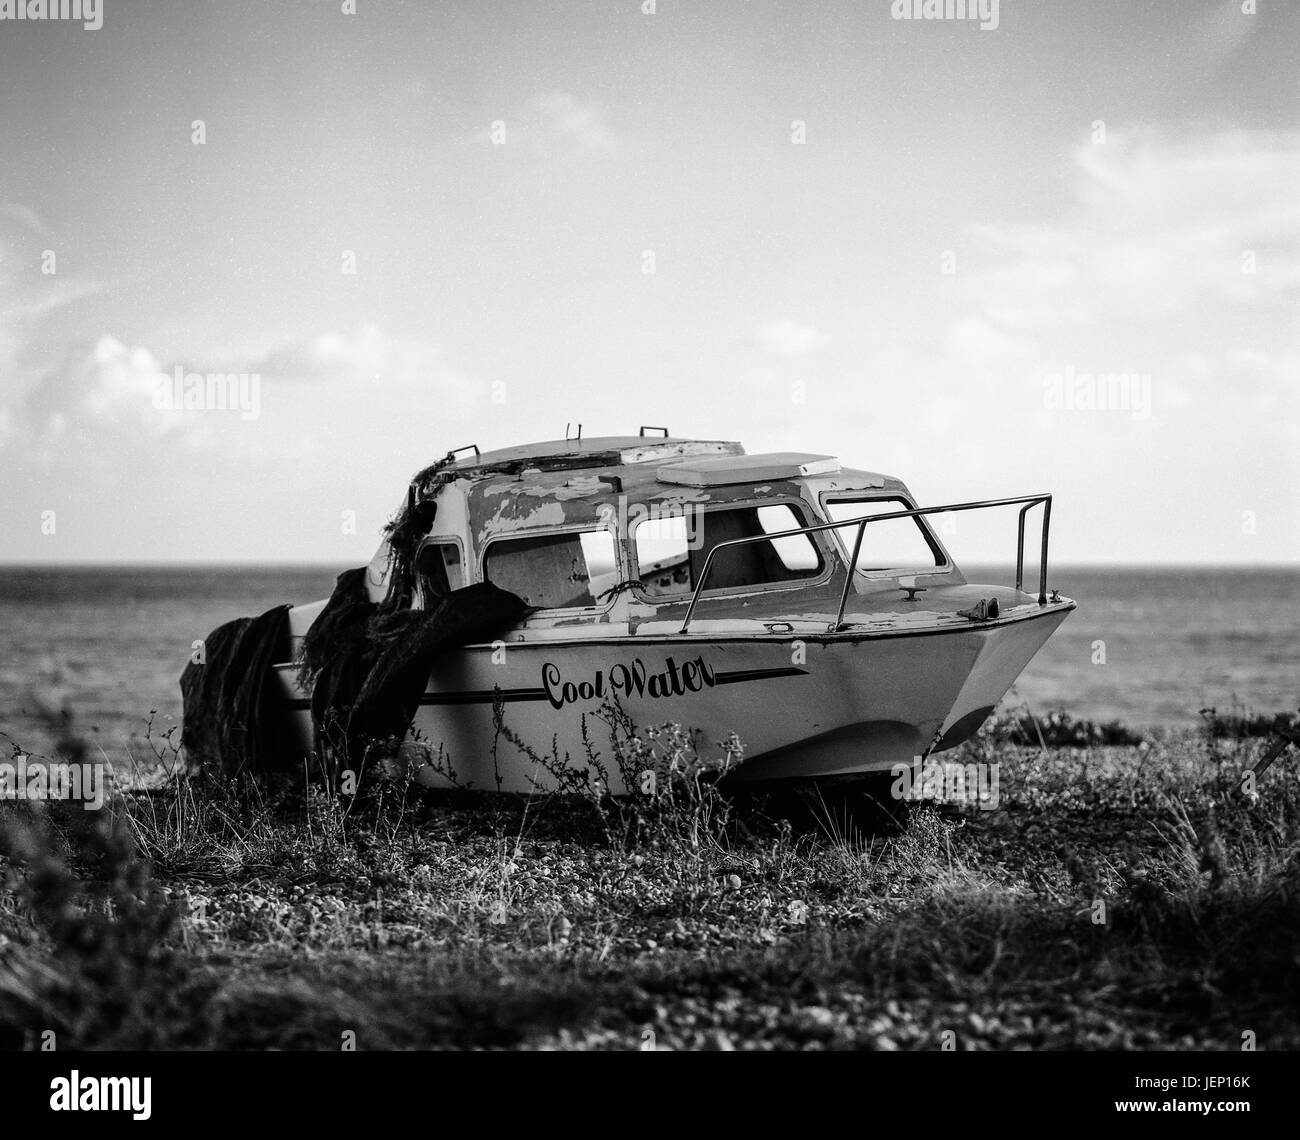 Boat left abandoned on beach, photographed with a Mamiya Rb67 film camera and some black and white film Stock Photo